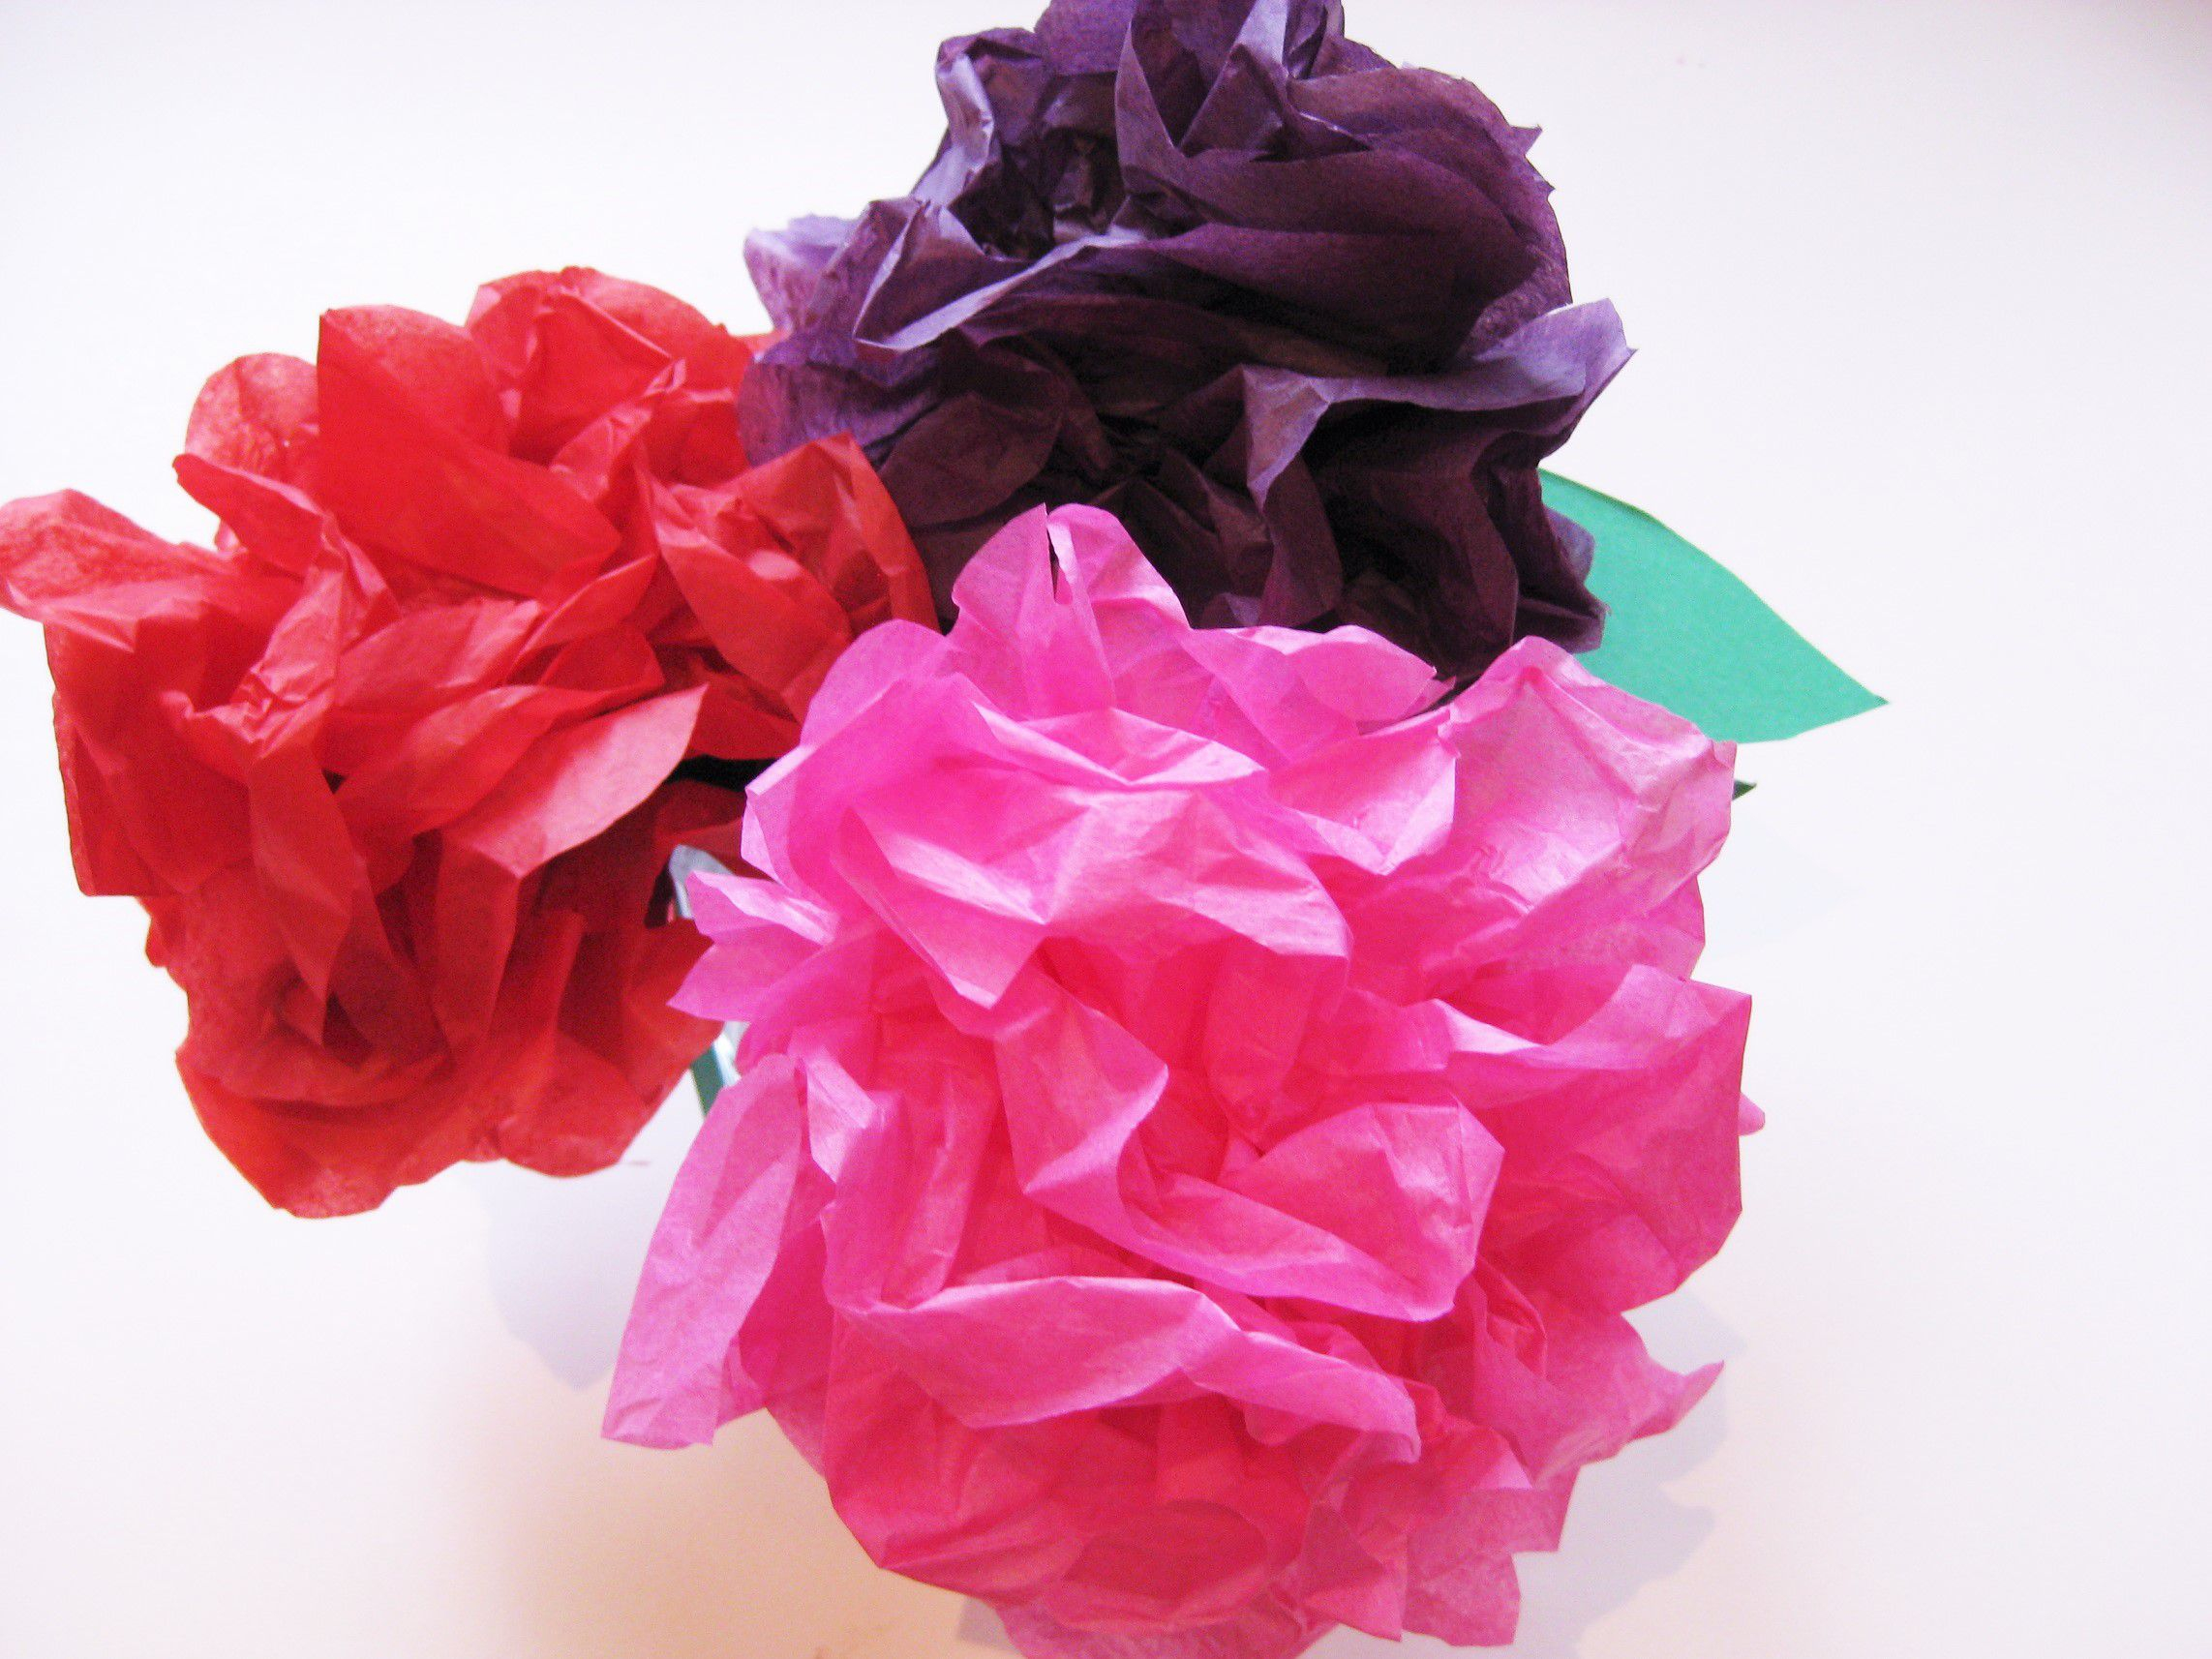 How To Make Flowers With Origami Simple Steps To Craft Tissue Paper Flowers